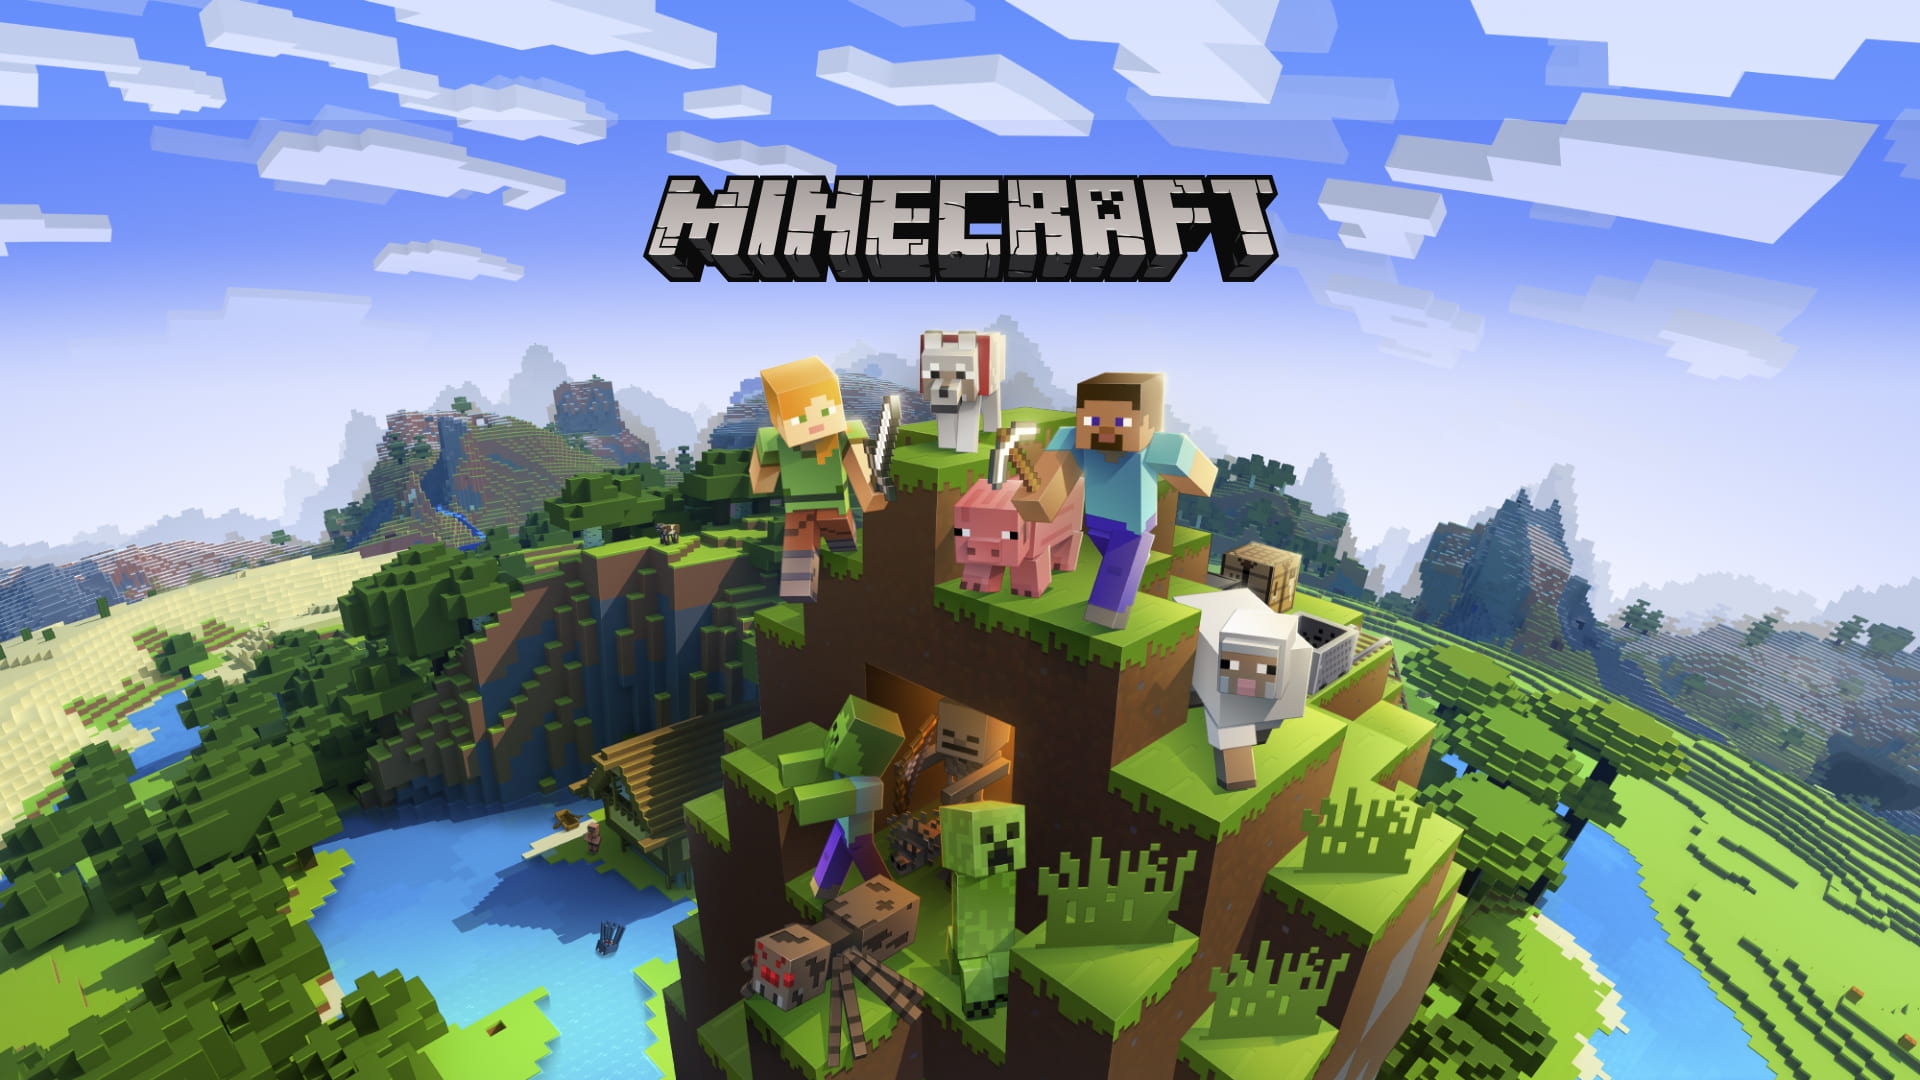 cheapest place to buy minecraft for mac